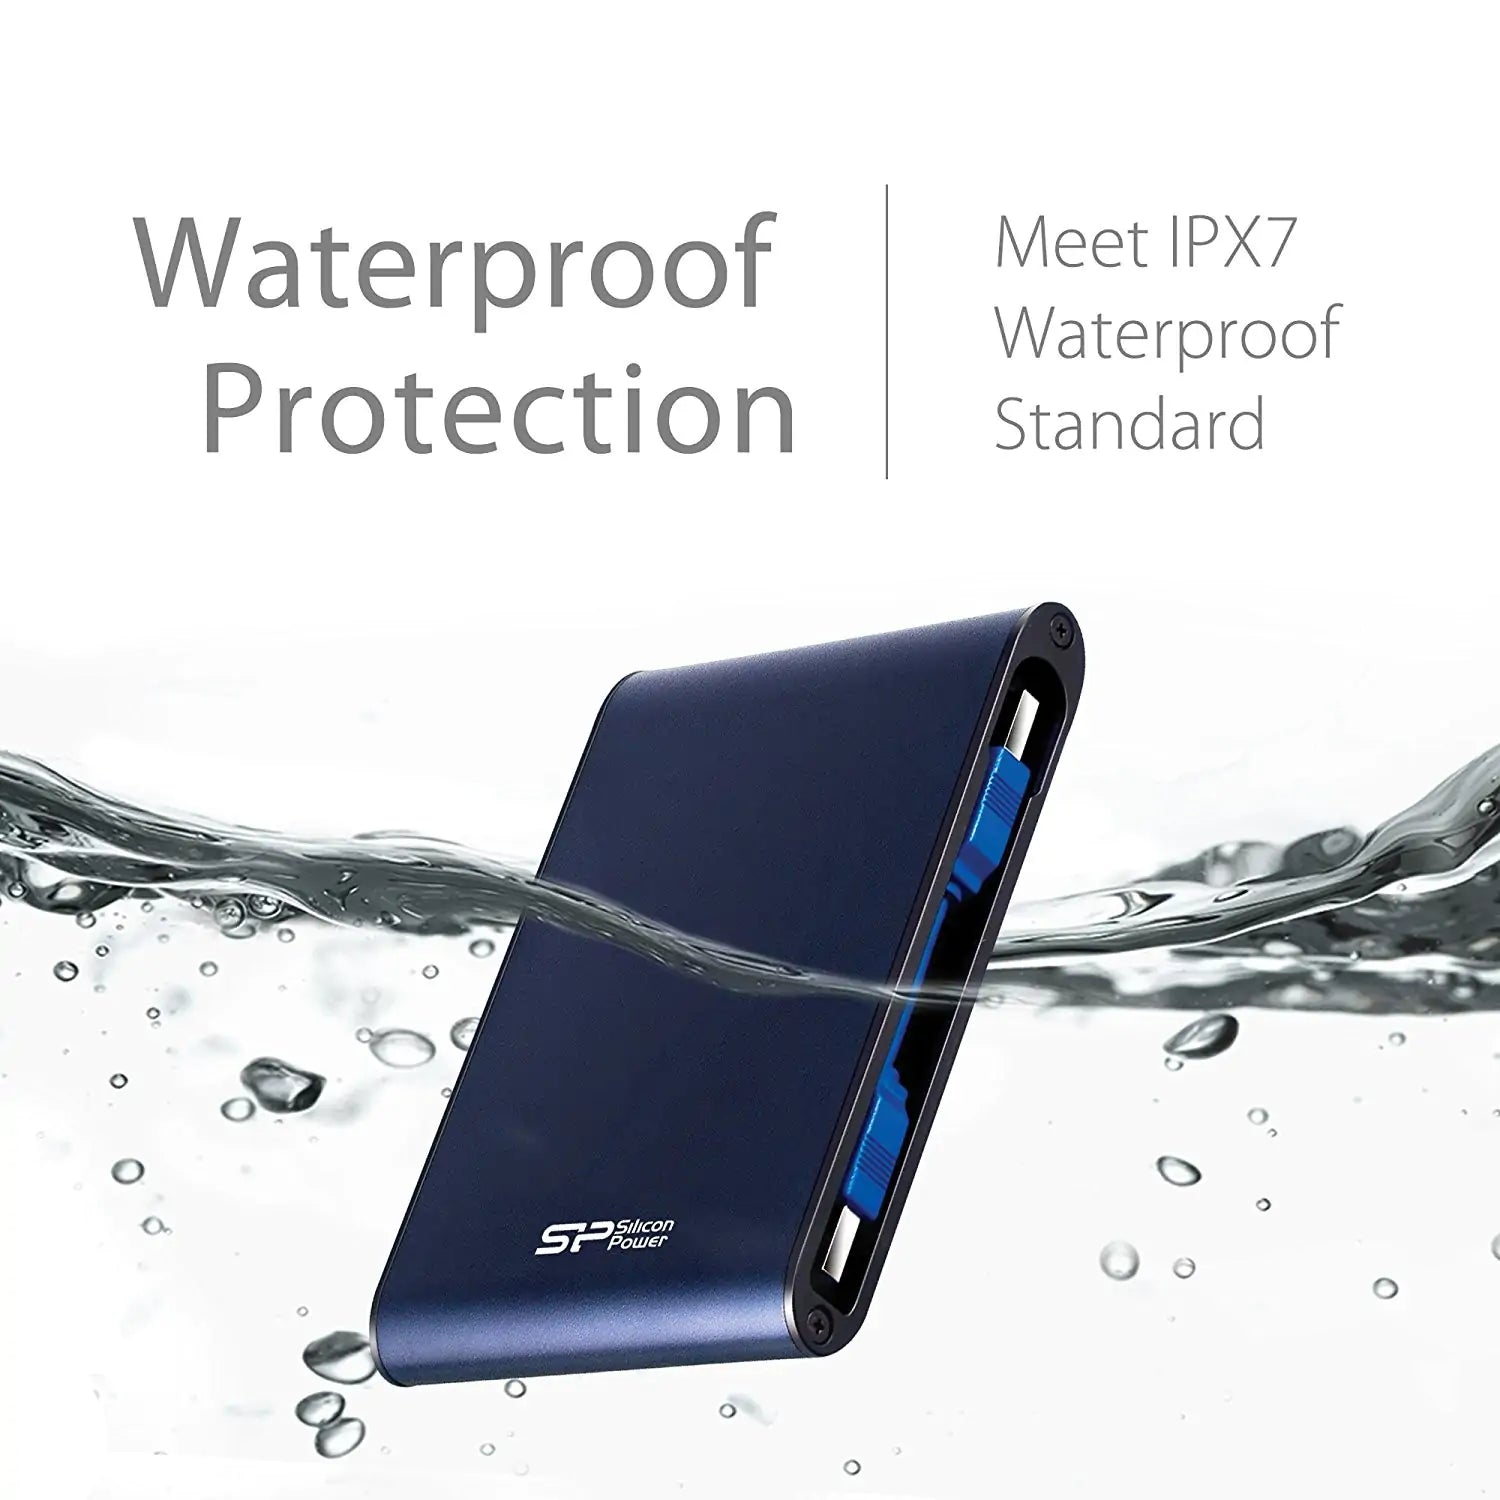 Silicon Power 2TB A80 Rugged Shock, Water, Pressureproof Portable External Hard Drive USB 3.0 For PC,MAC,XBOX,PS4,PS5